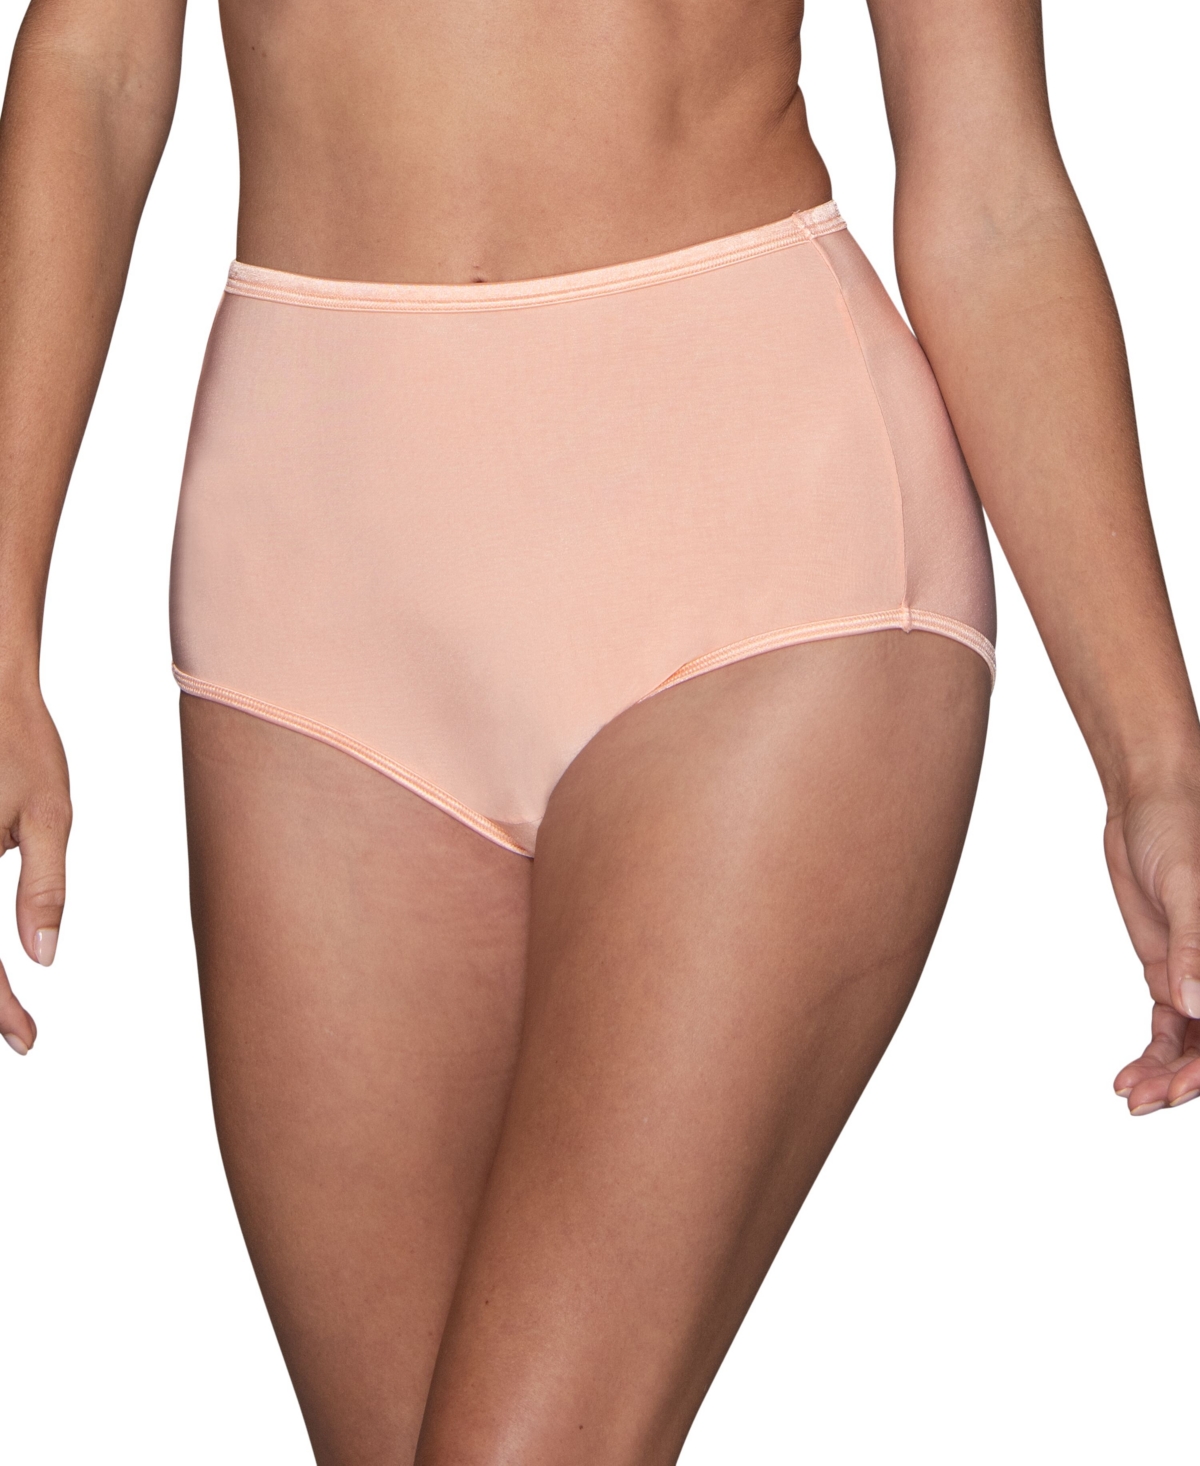 Vanity Fair Illumination Brief Underwear 13109, Also Available In Extended Sizes In Peach Please